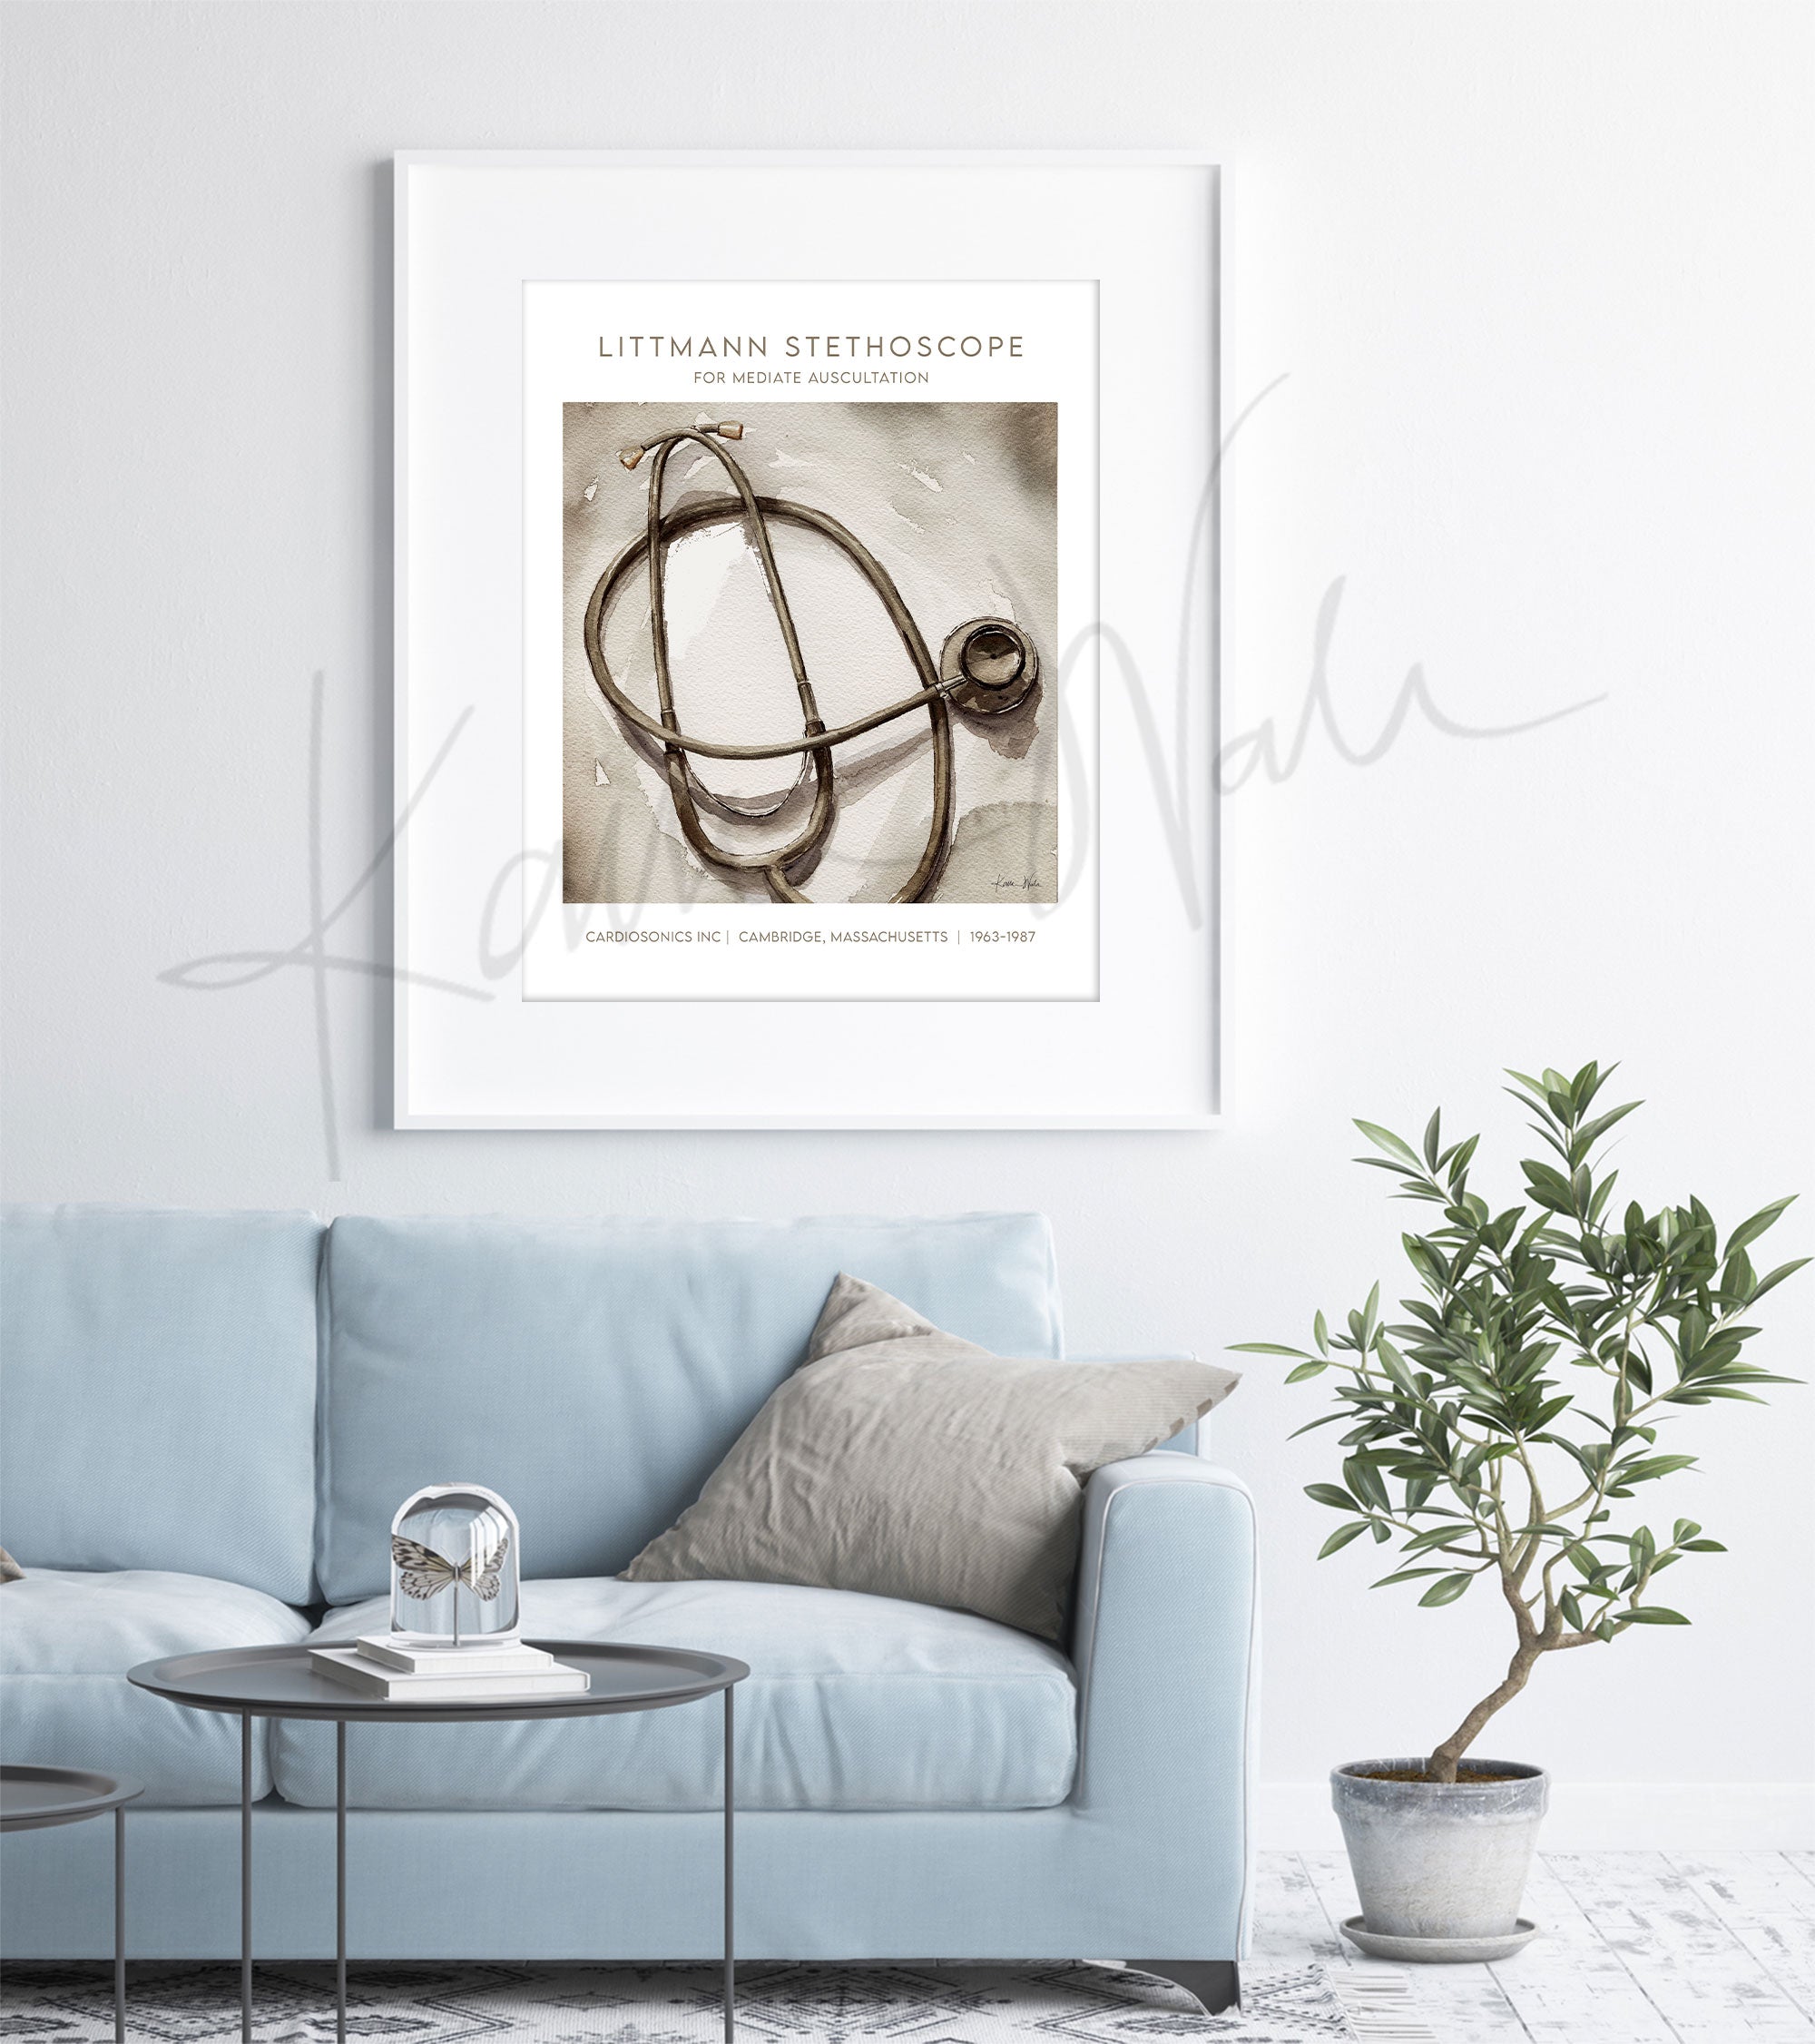 Framed watercolor painting of a Littmann stethoscope with information on it in an antique style. The painting is hanging over a blue couch.